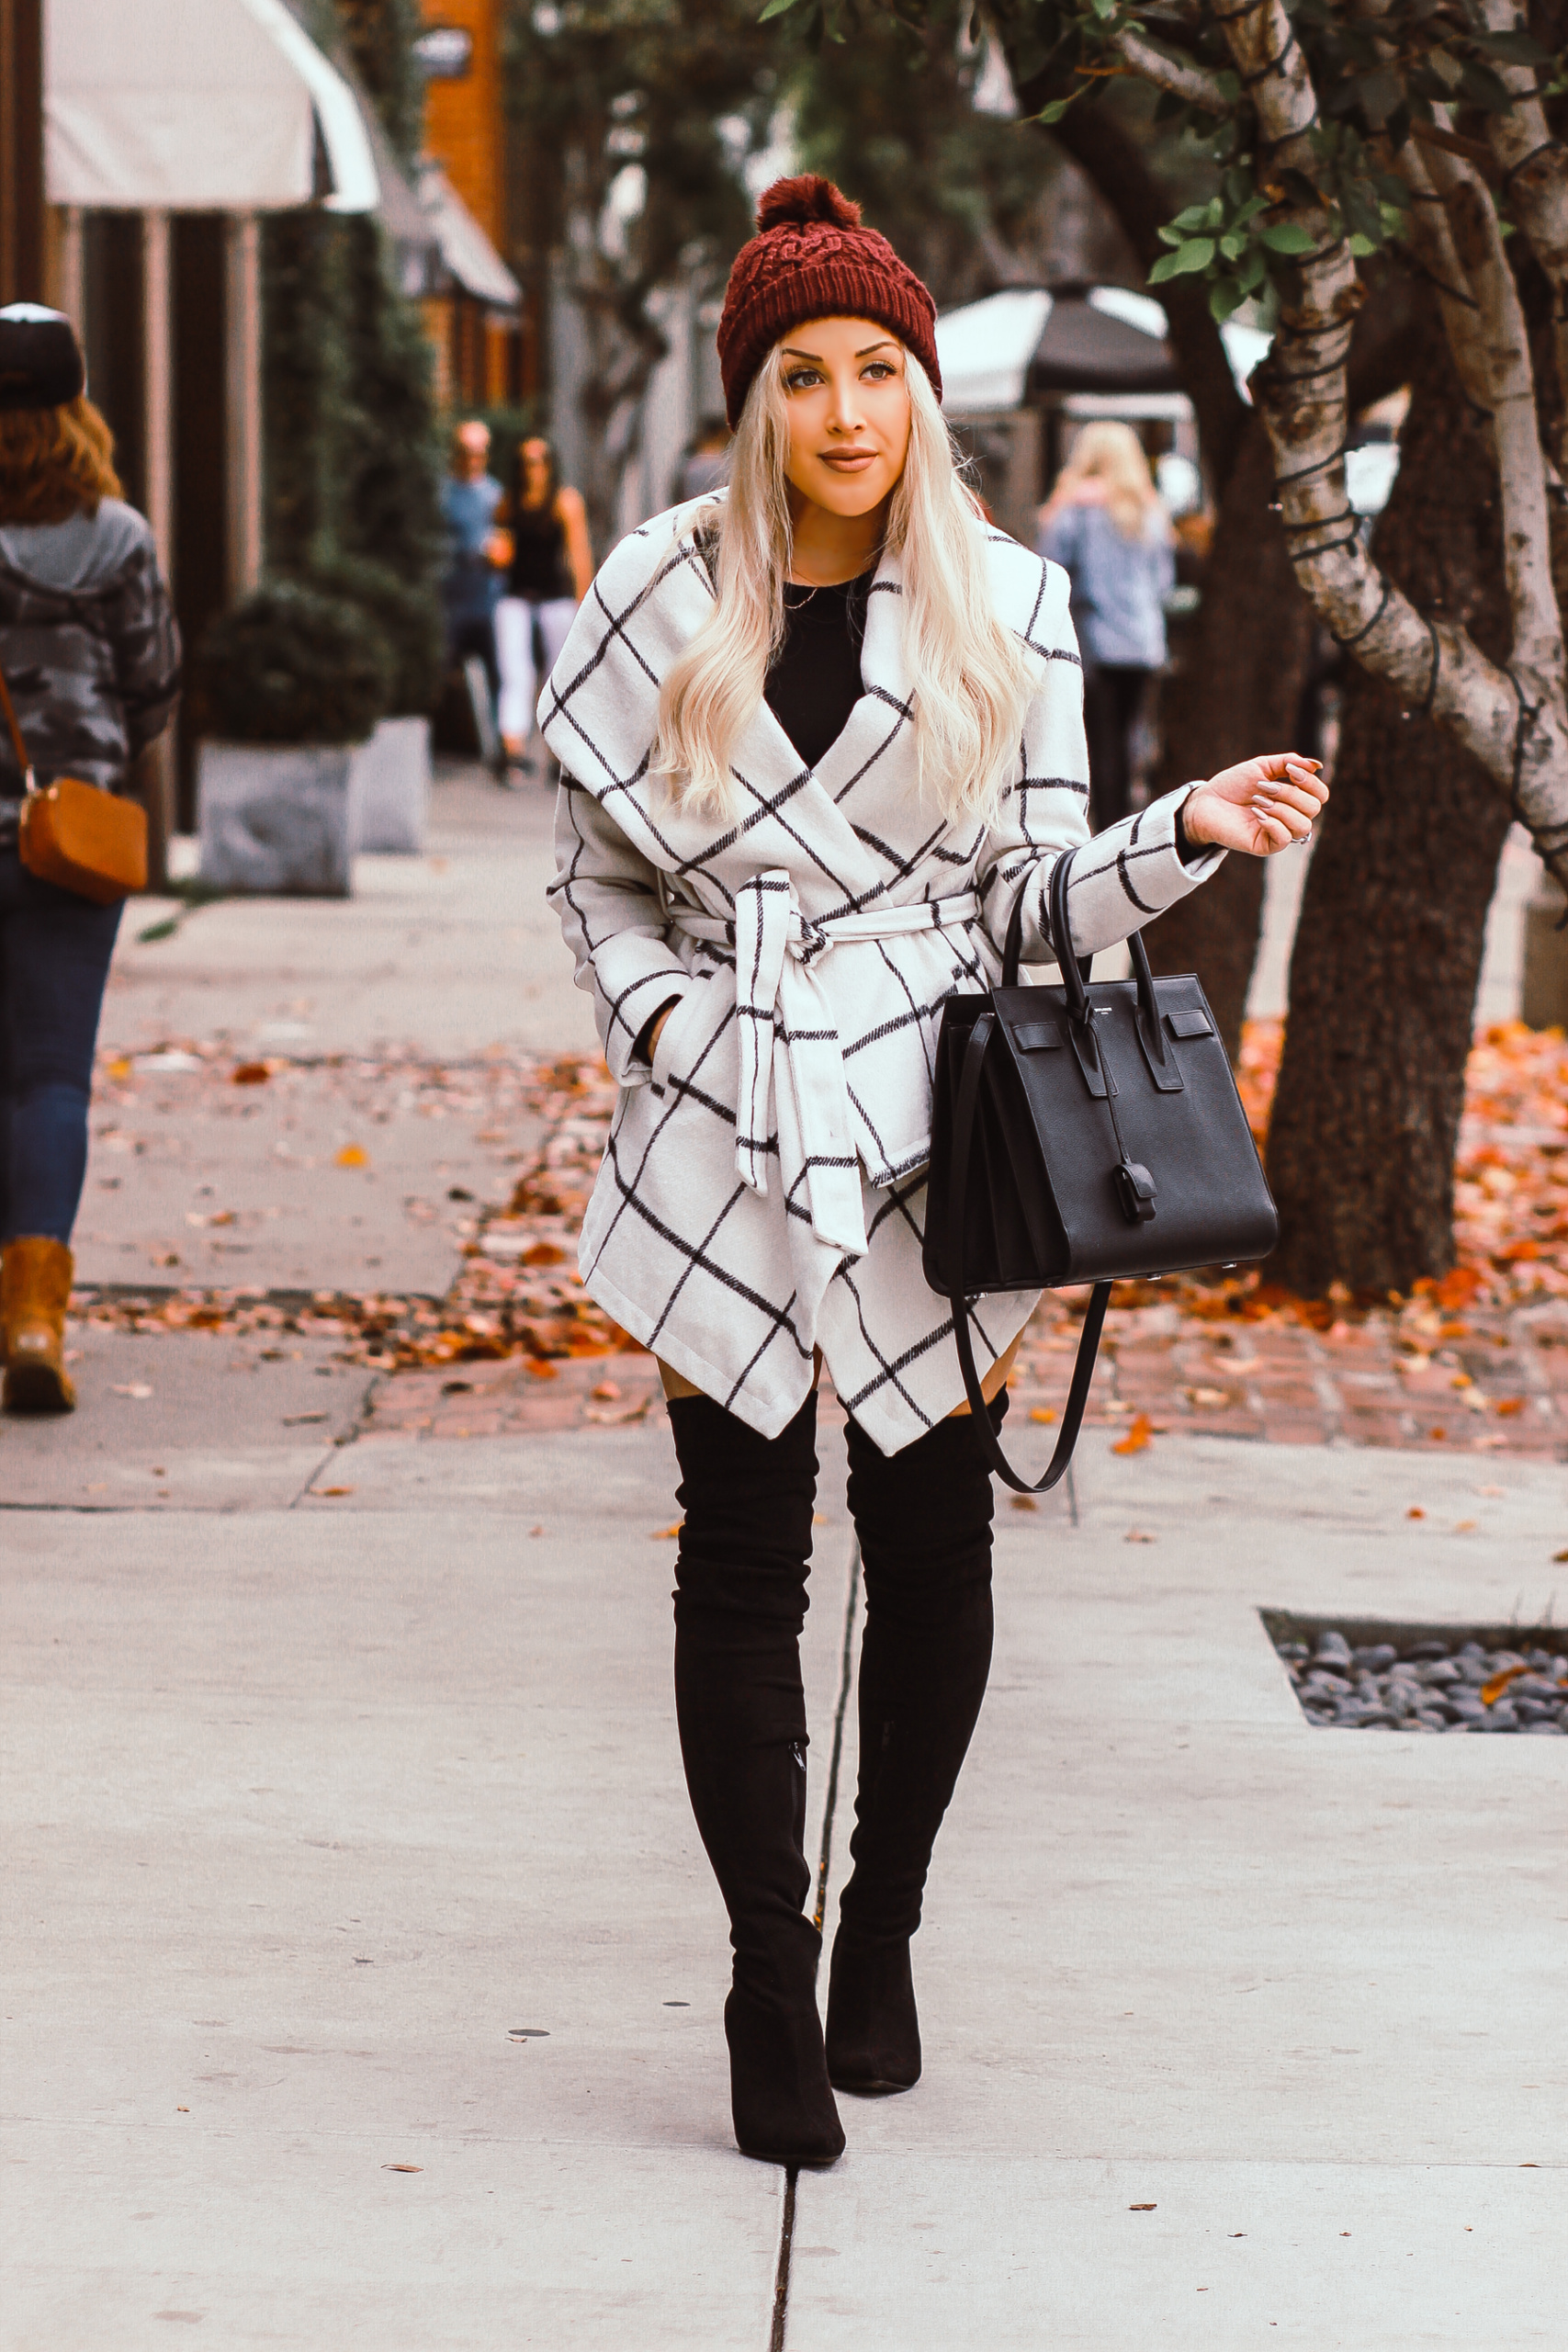 Winter Fashion, Black & White Grid Coat, Pom Beanie, Thigh High Boots, YSL Bag | Blondie in the City